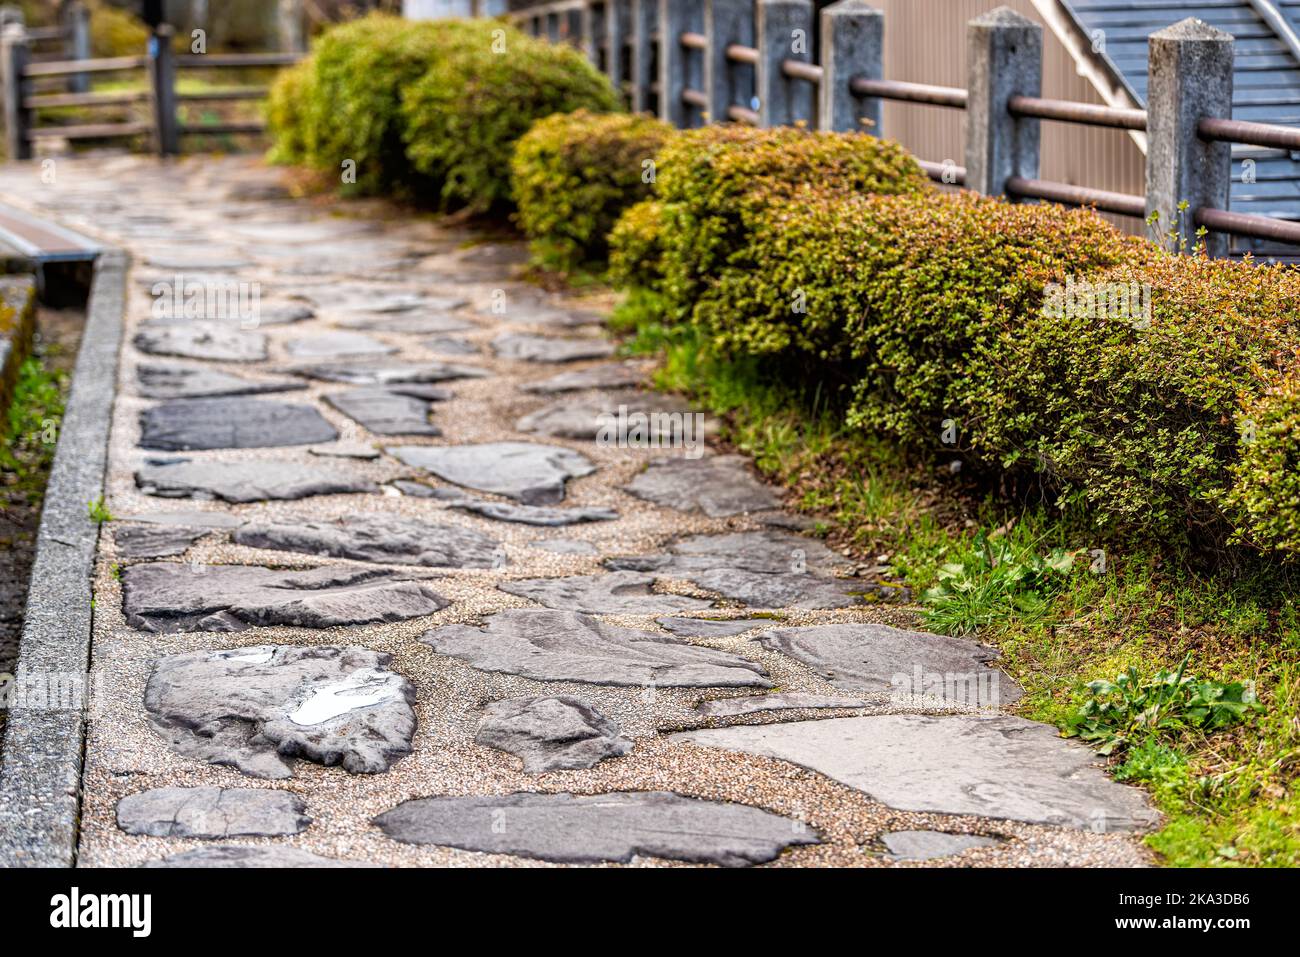 Stone paved path footpath in Takayama, Japan at Higashiyama walking course in historic city of Gifu Prefecture by Tounin temple shrines Stock Photo